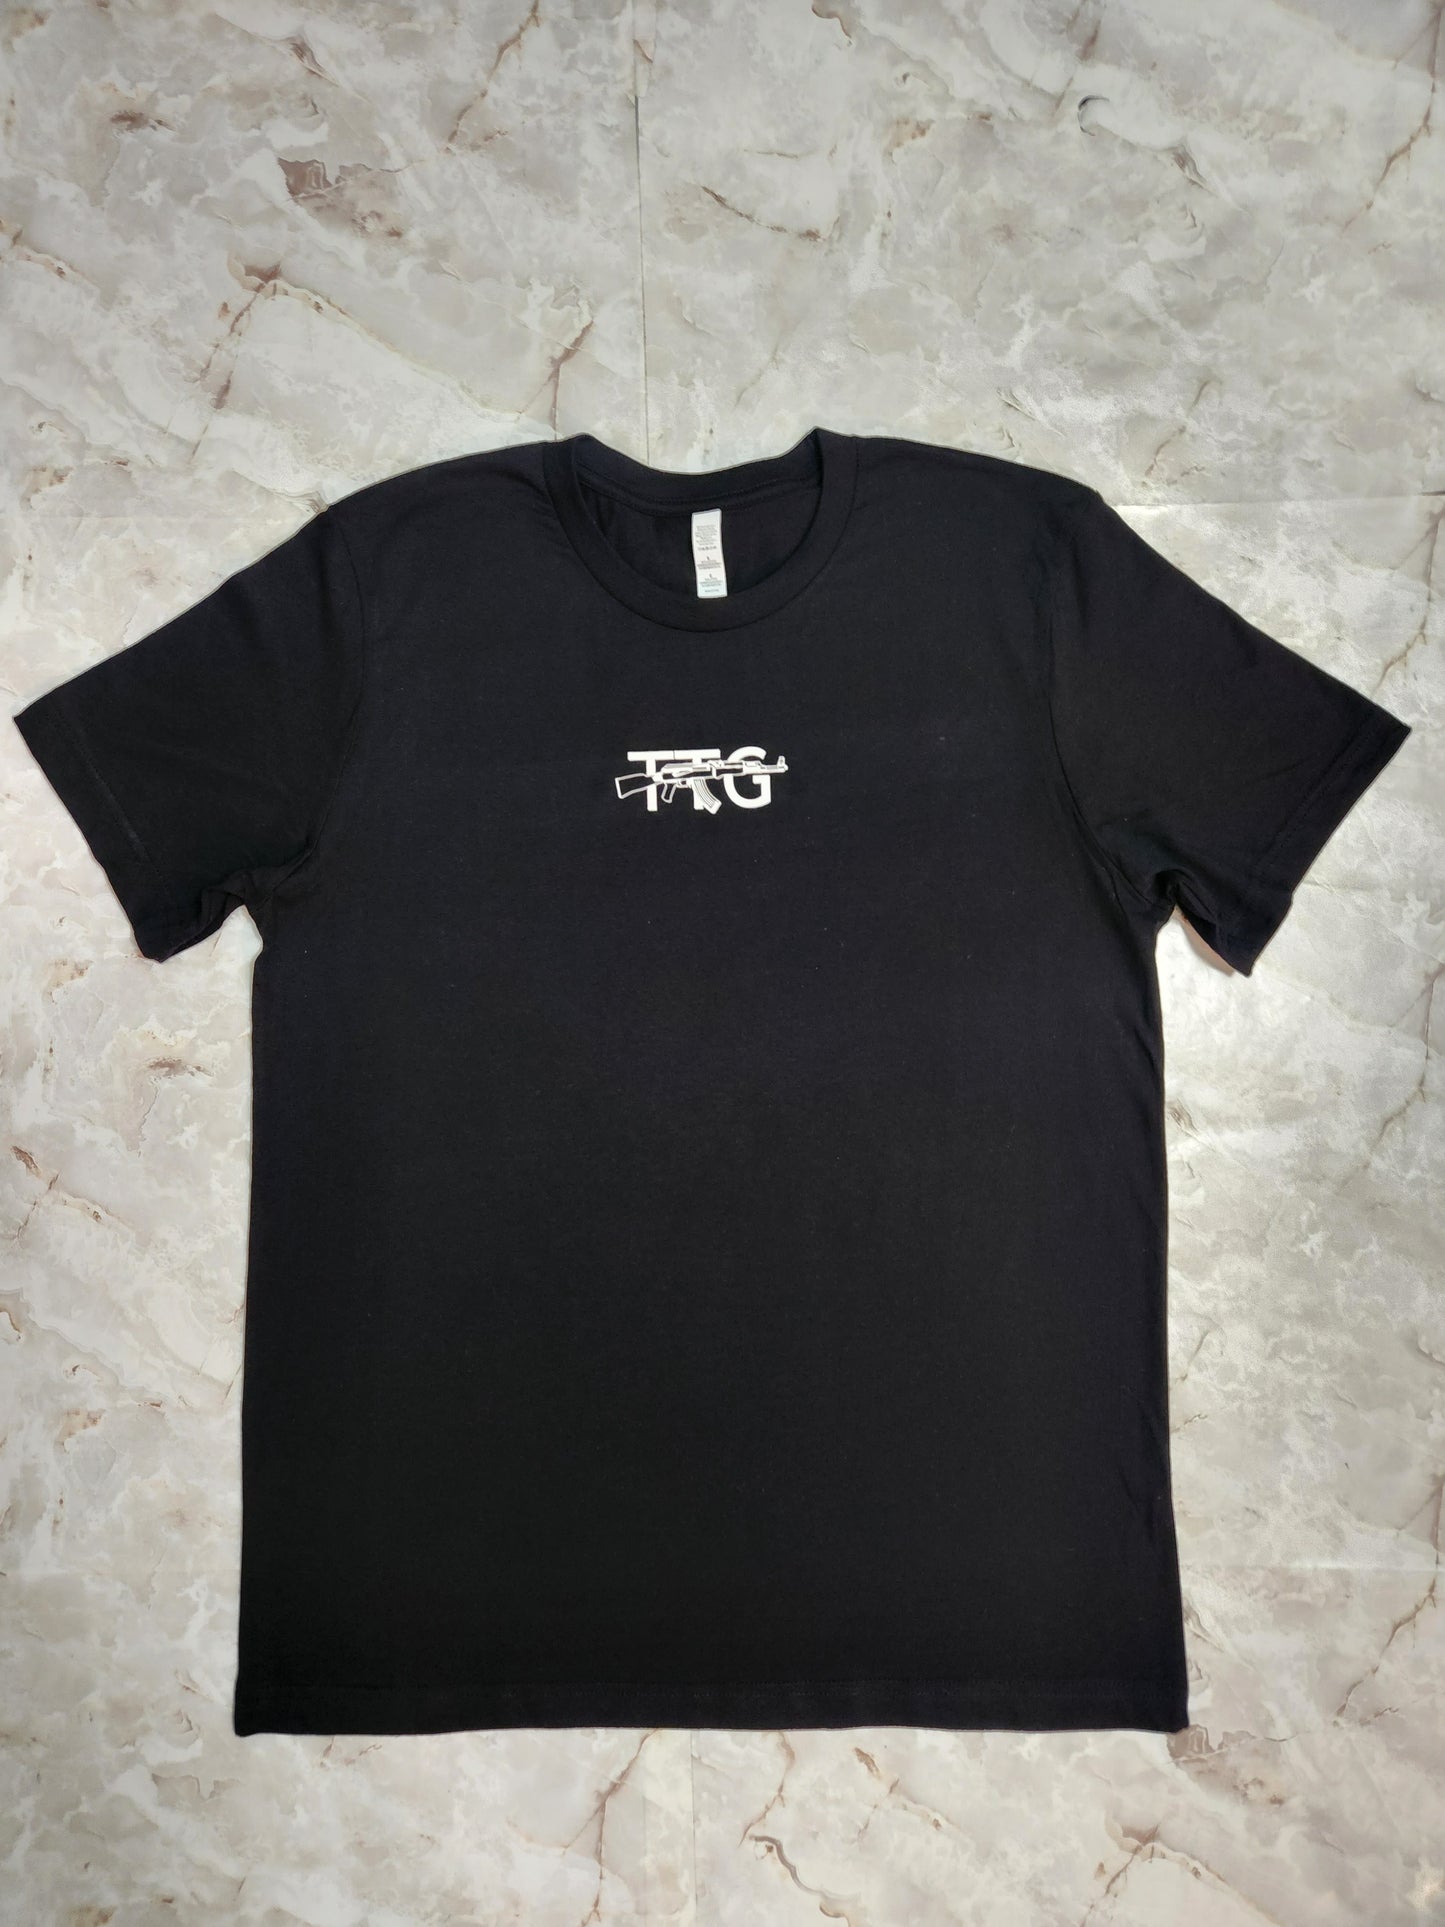 T.T.G T-Shirt - Centre Ave Clothing Co.